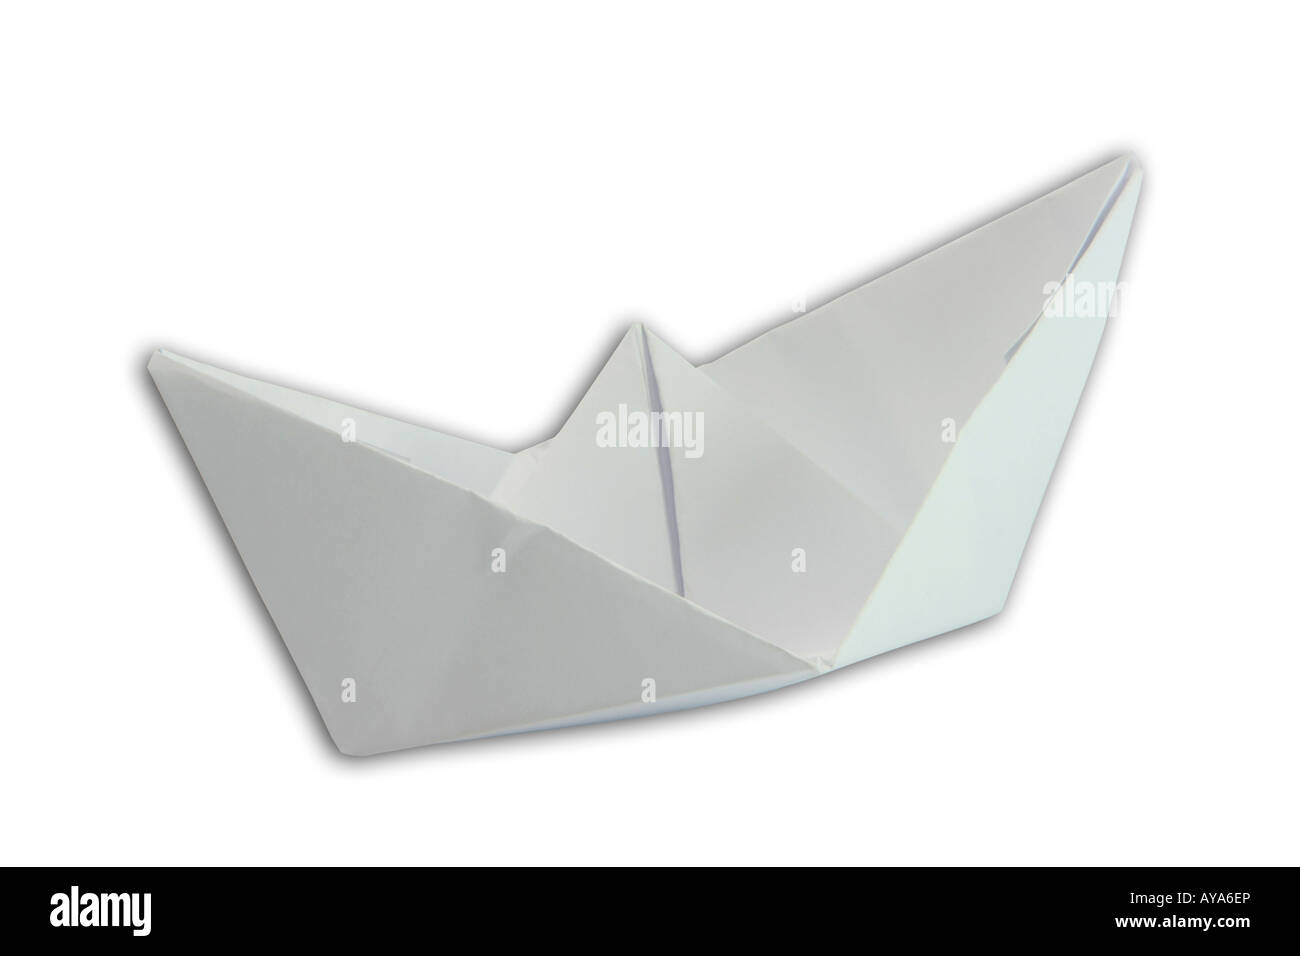 paper boat figure isolated on white background with clipping path Stock Photo